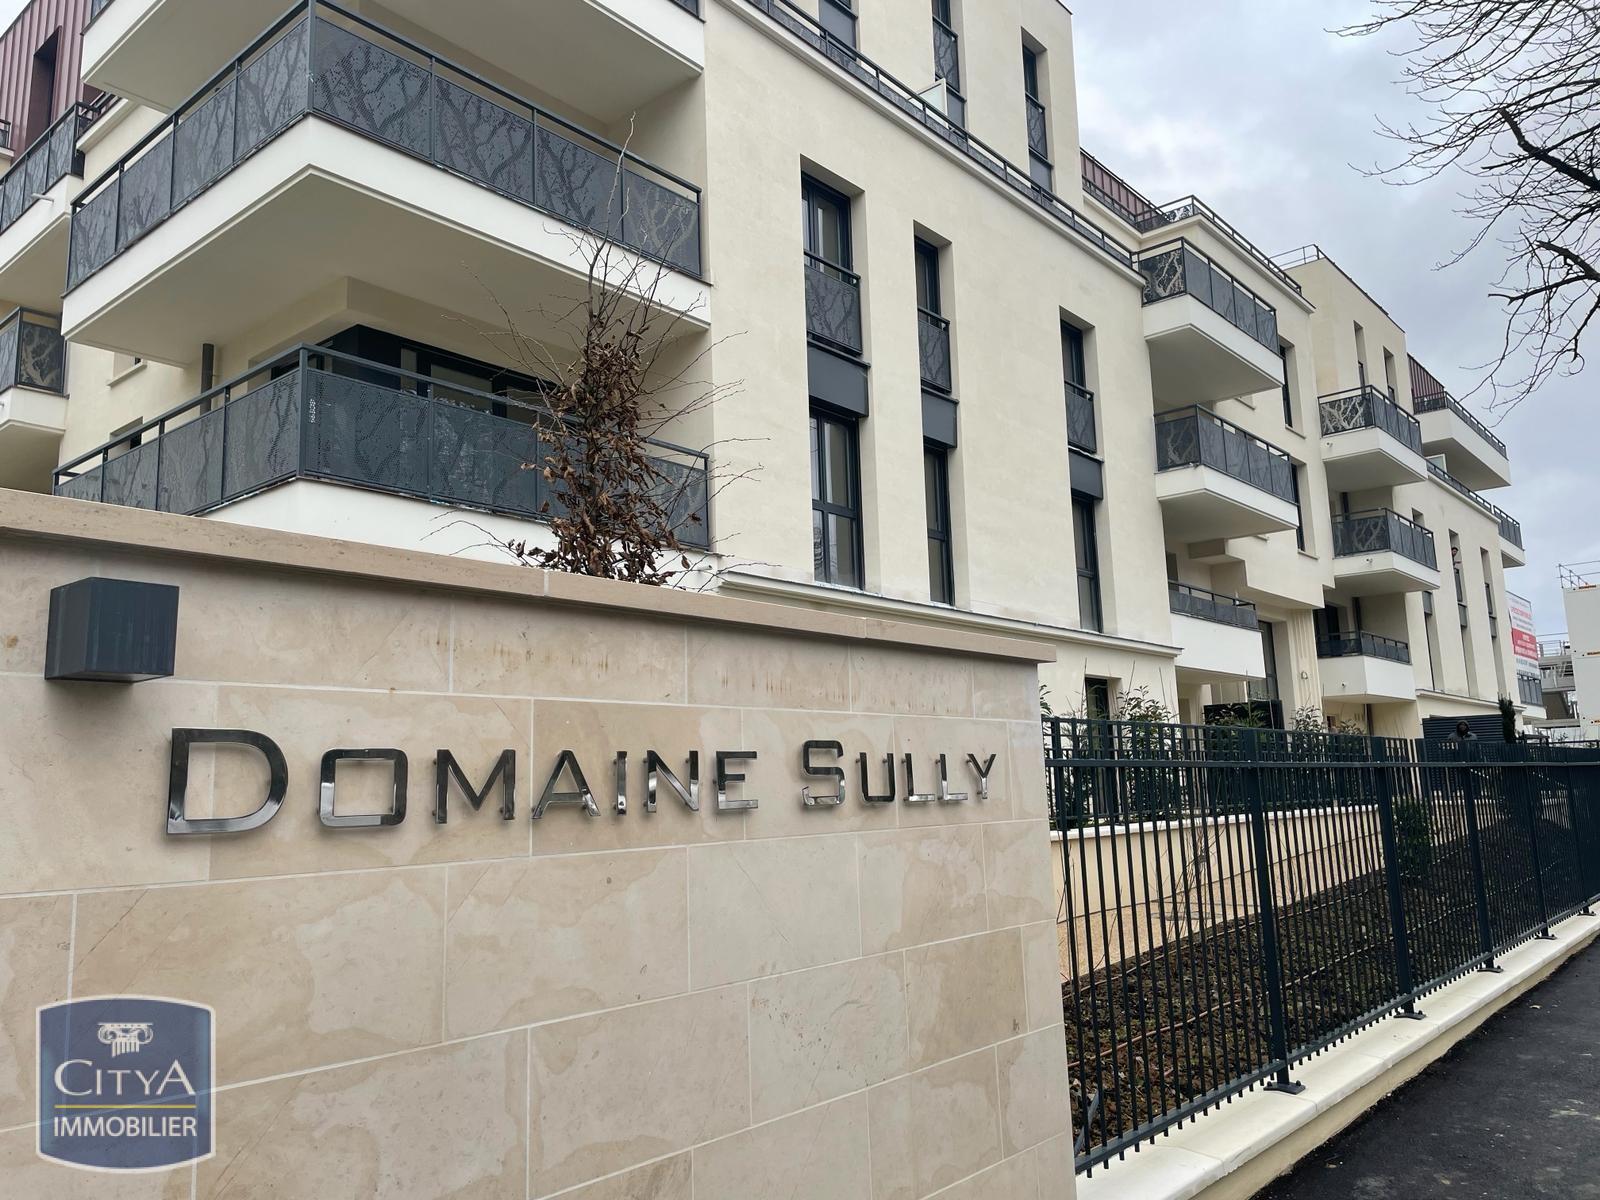 Appartement a louer chatenay-malabry - 2 pièce(s) - 48.22 m2 - Surfyn